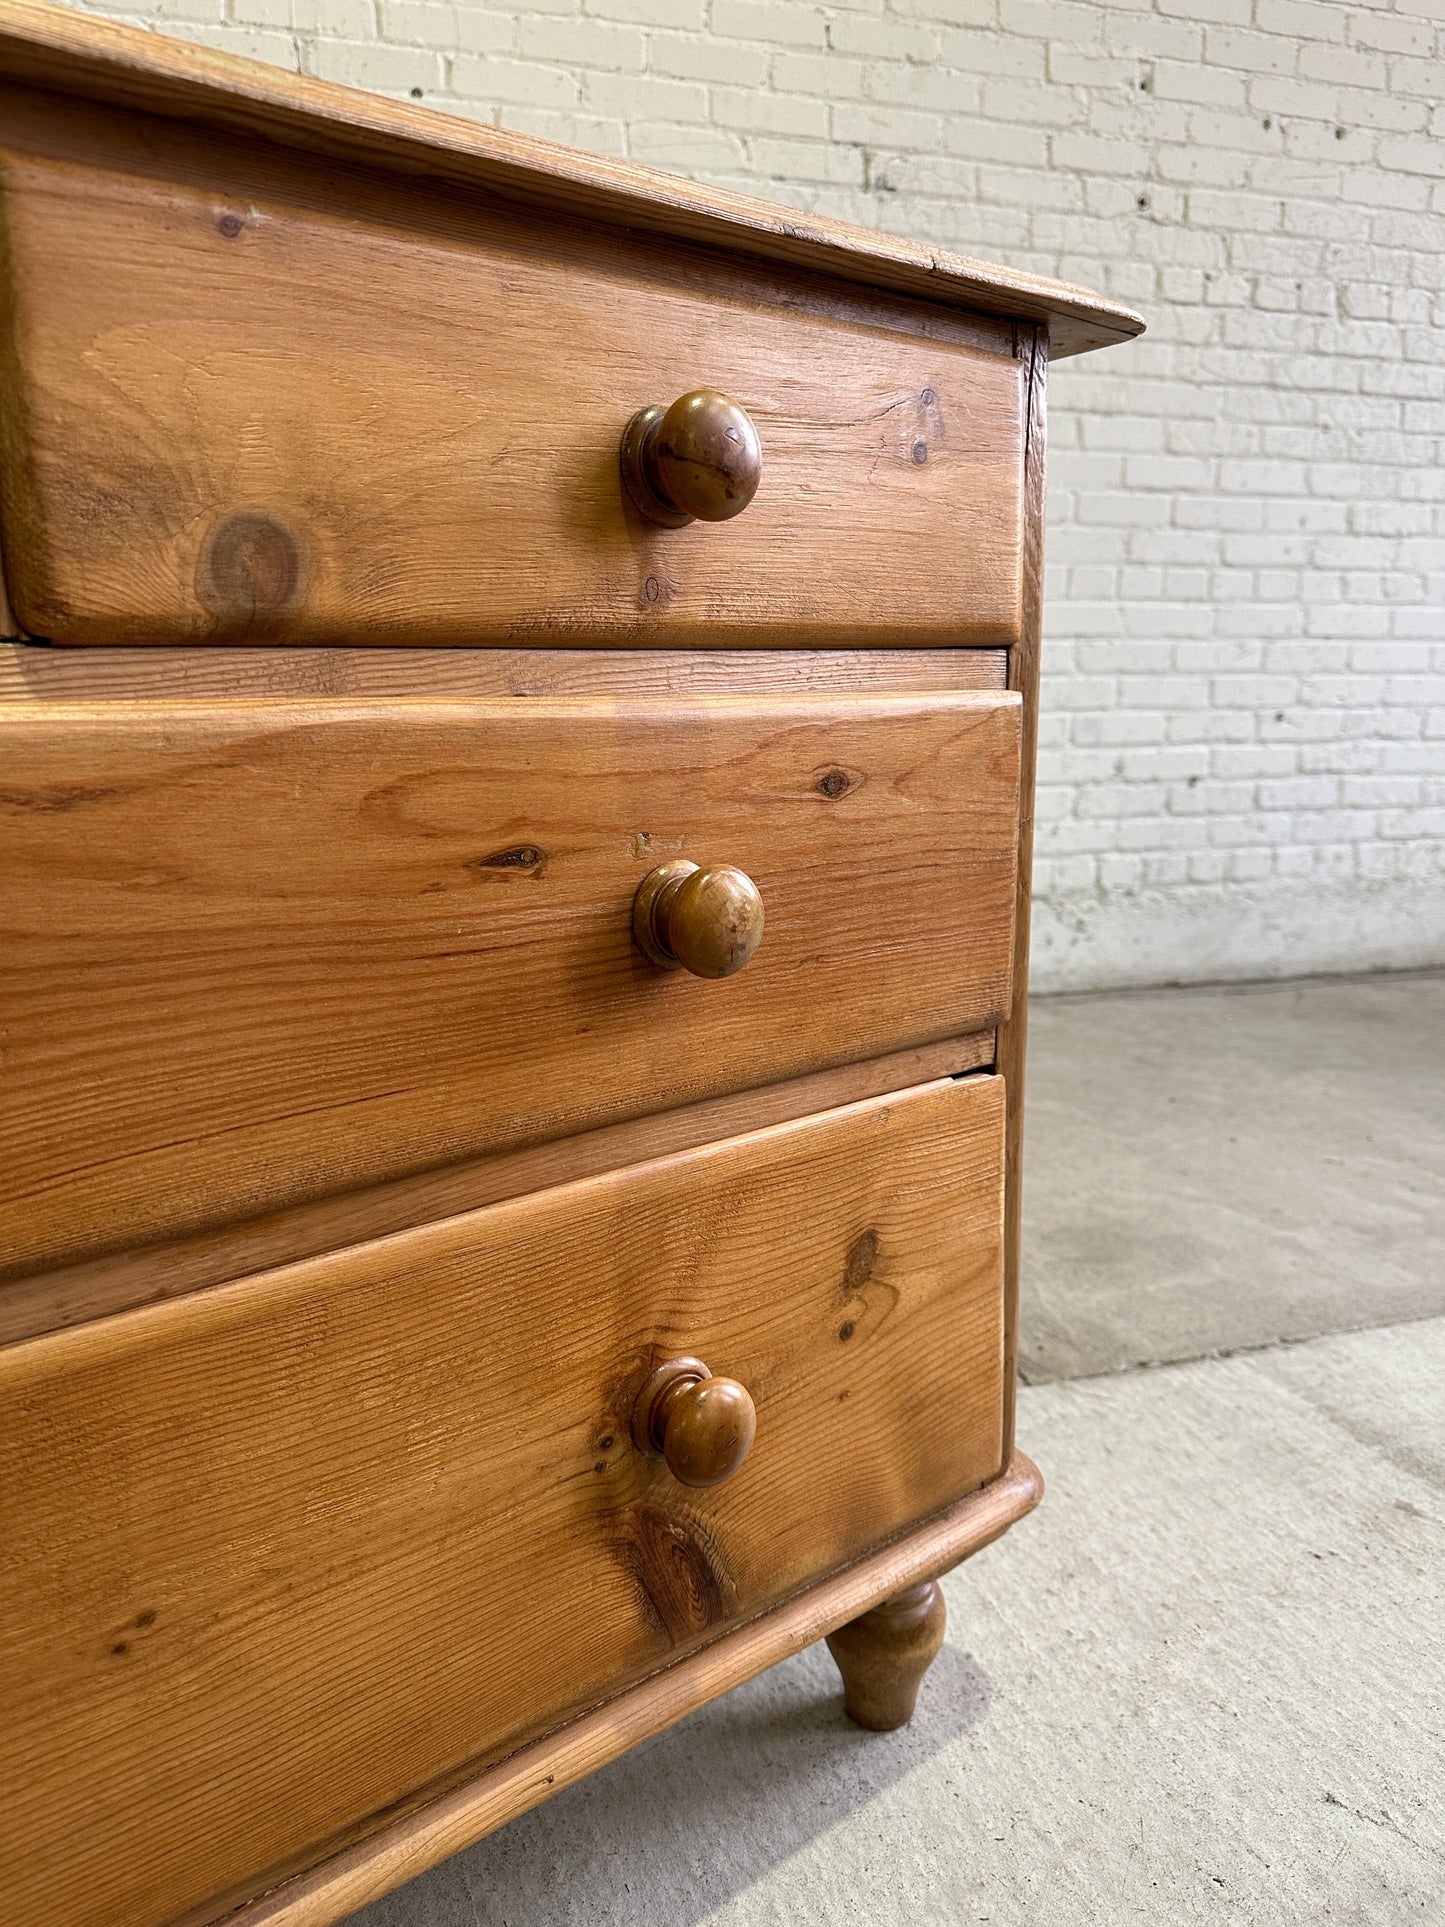 Antique Pine English Chest of Drawers c. 1880